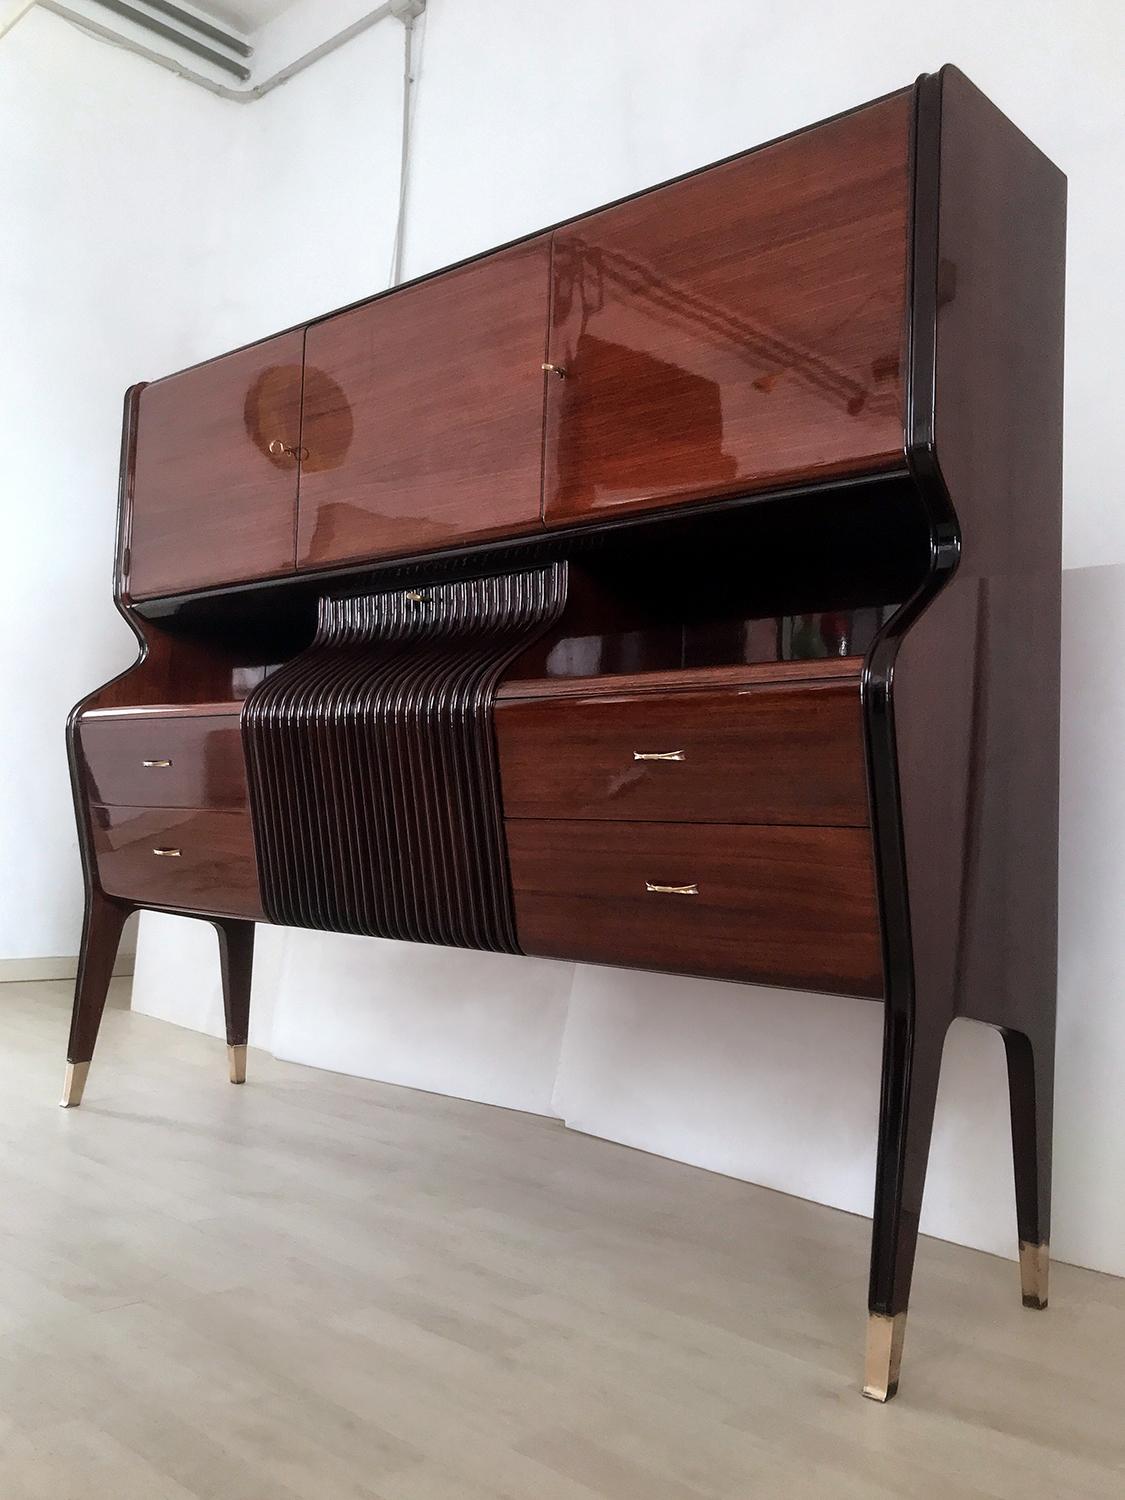 Stylish bar cabinet designed by Osvaldo Borsani in the 1950s.
Its structure is made of rosewood, characterized by a unique shape design given by its amazing curved frontal profile of the central drop-down door, very refined and finished with